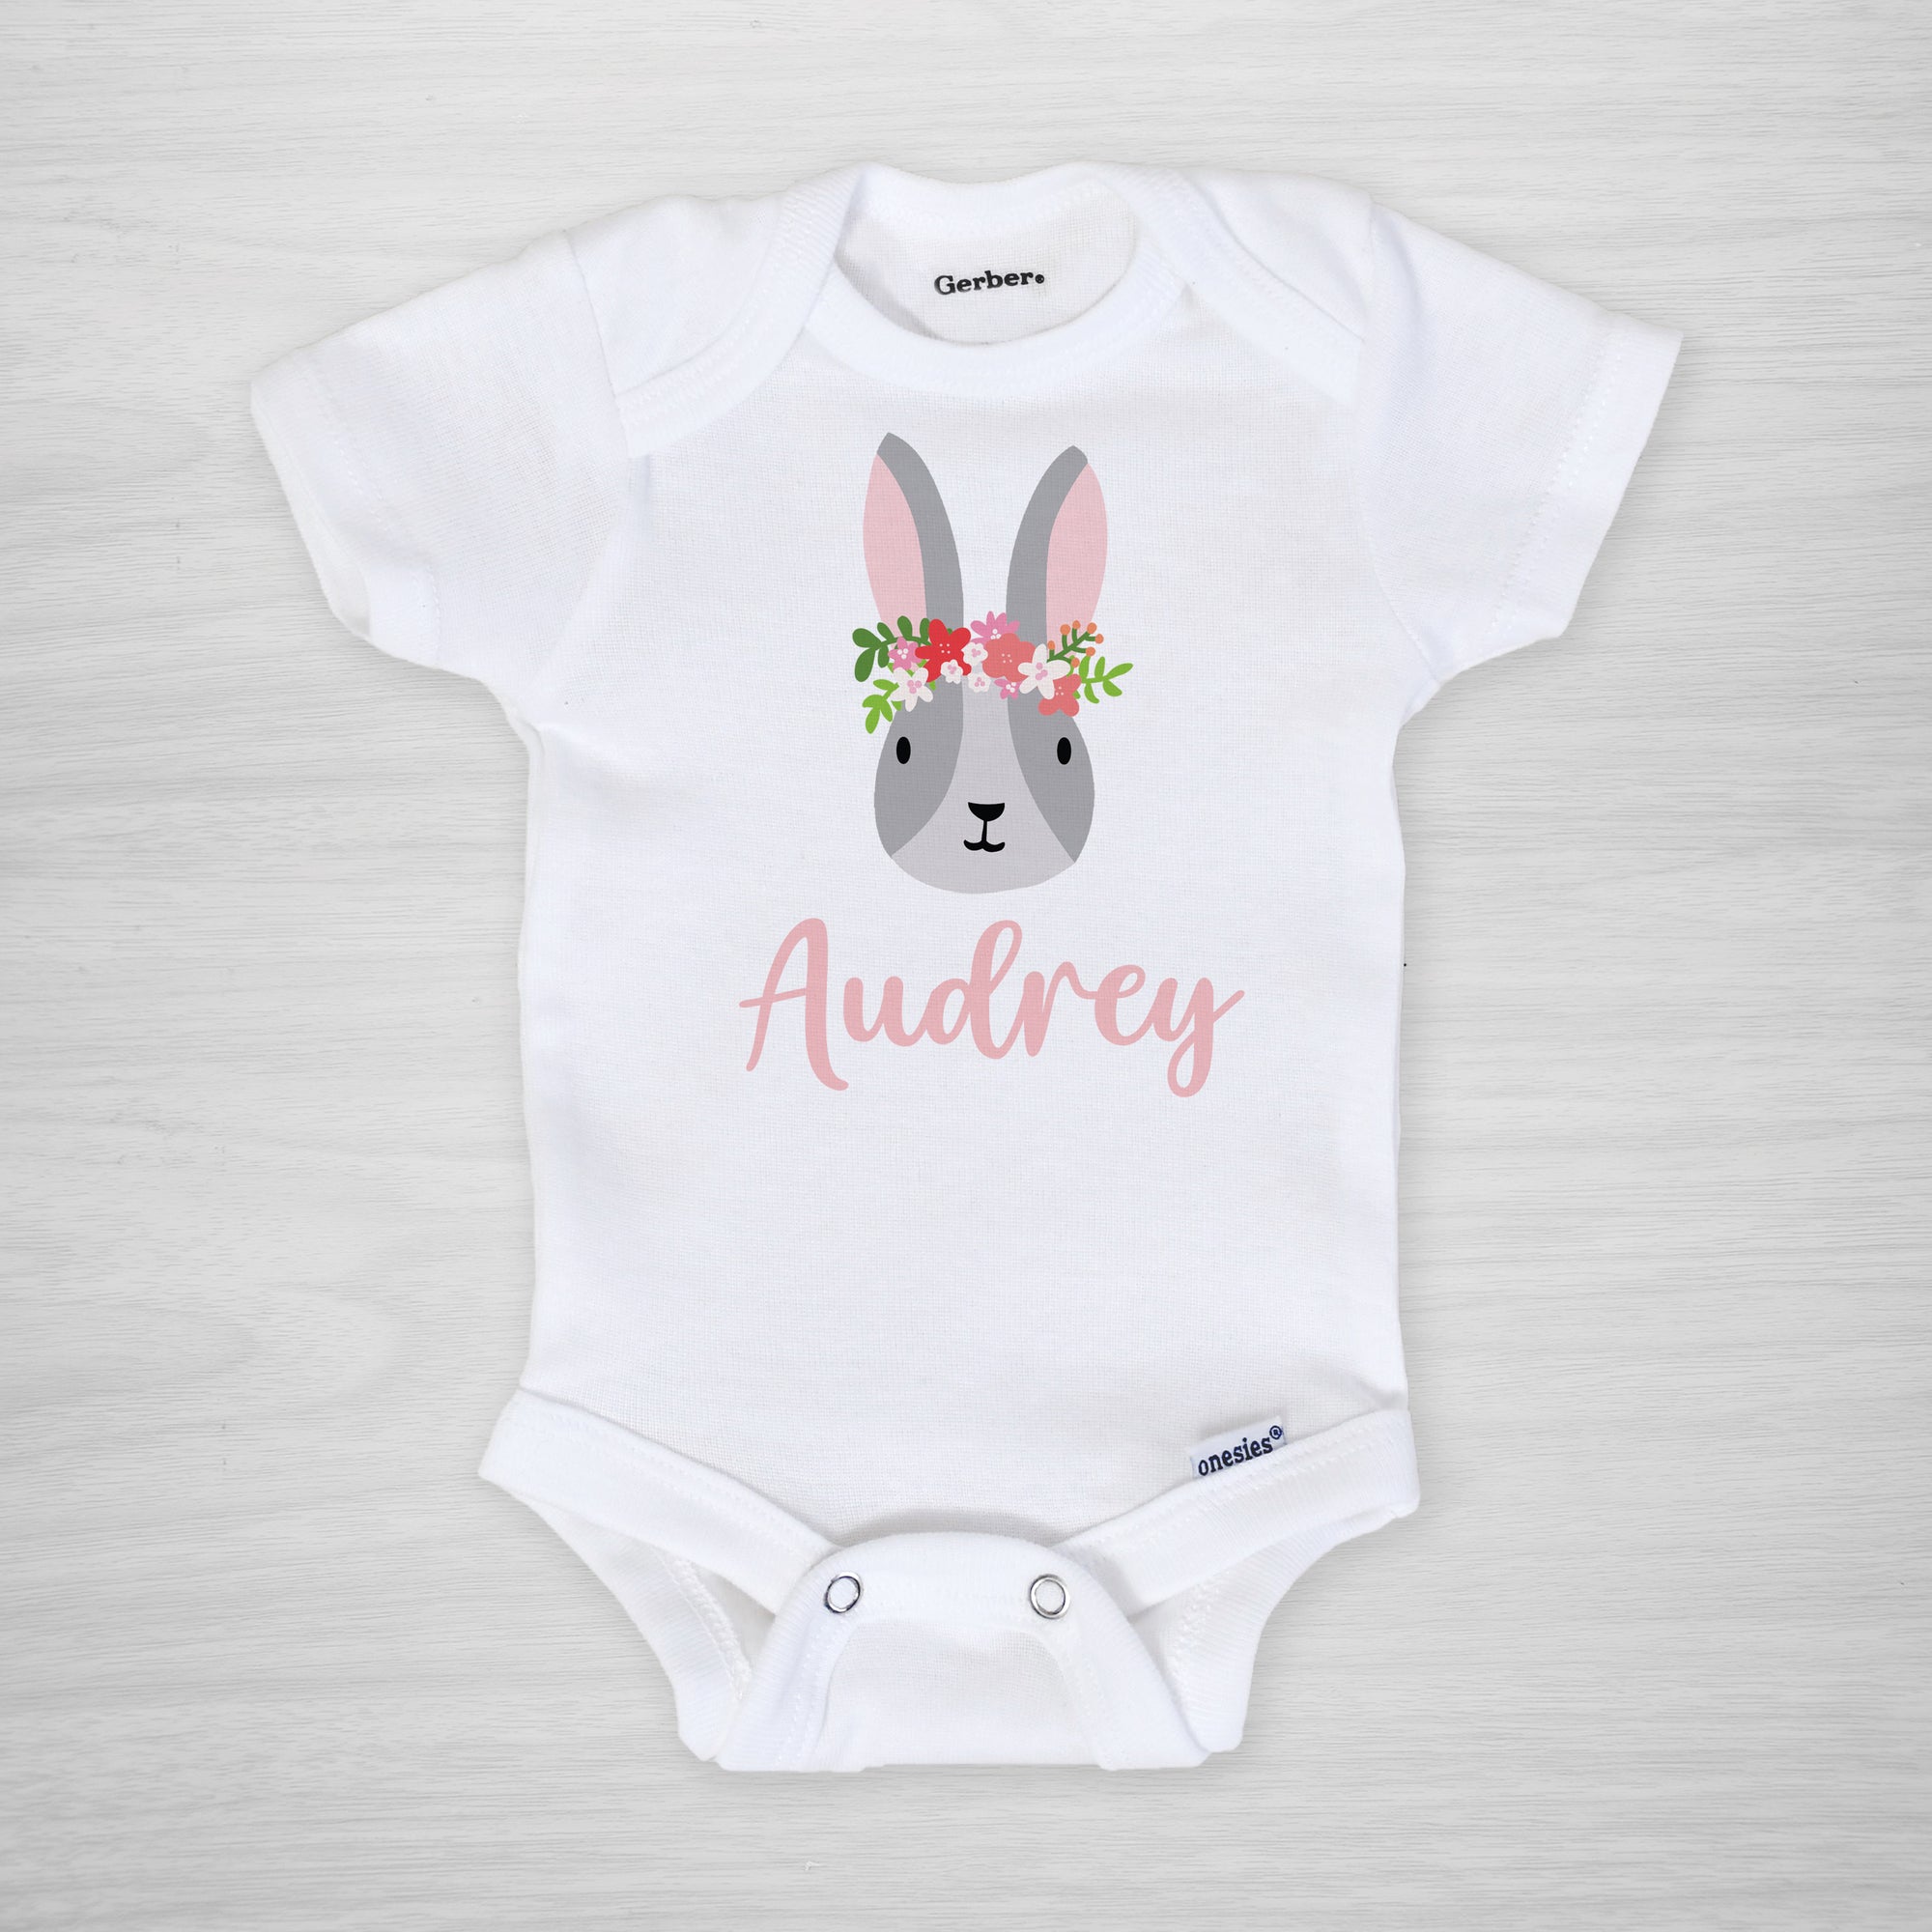 This onesie features a sweet Easter bunny with a crown of flowers, and your little one's name, short sleeved